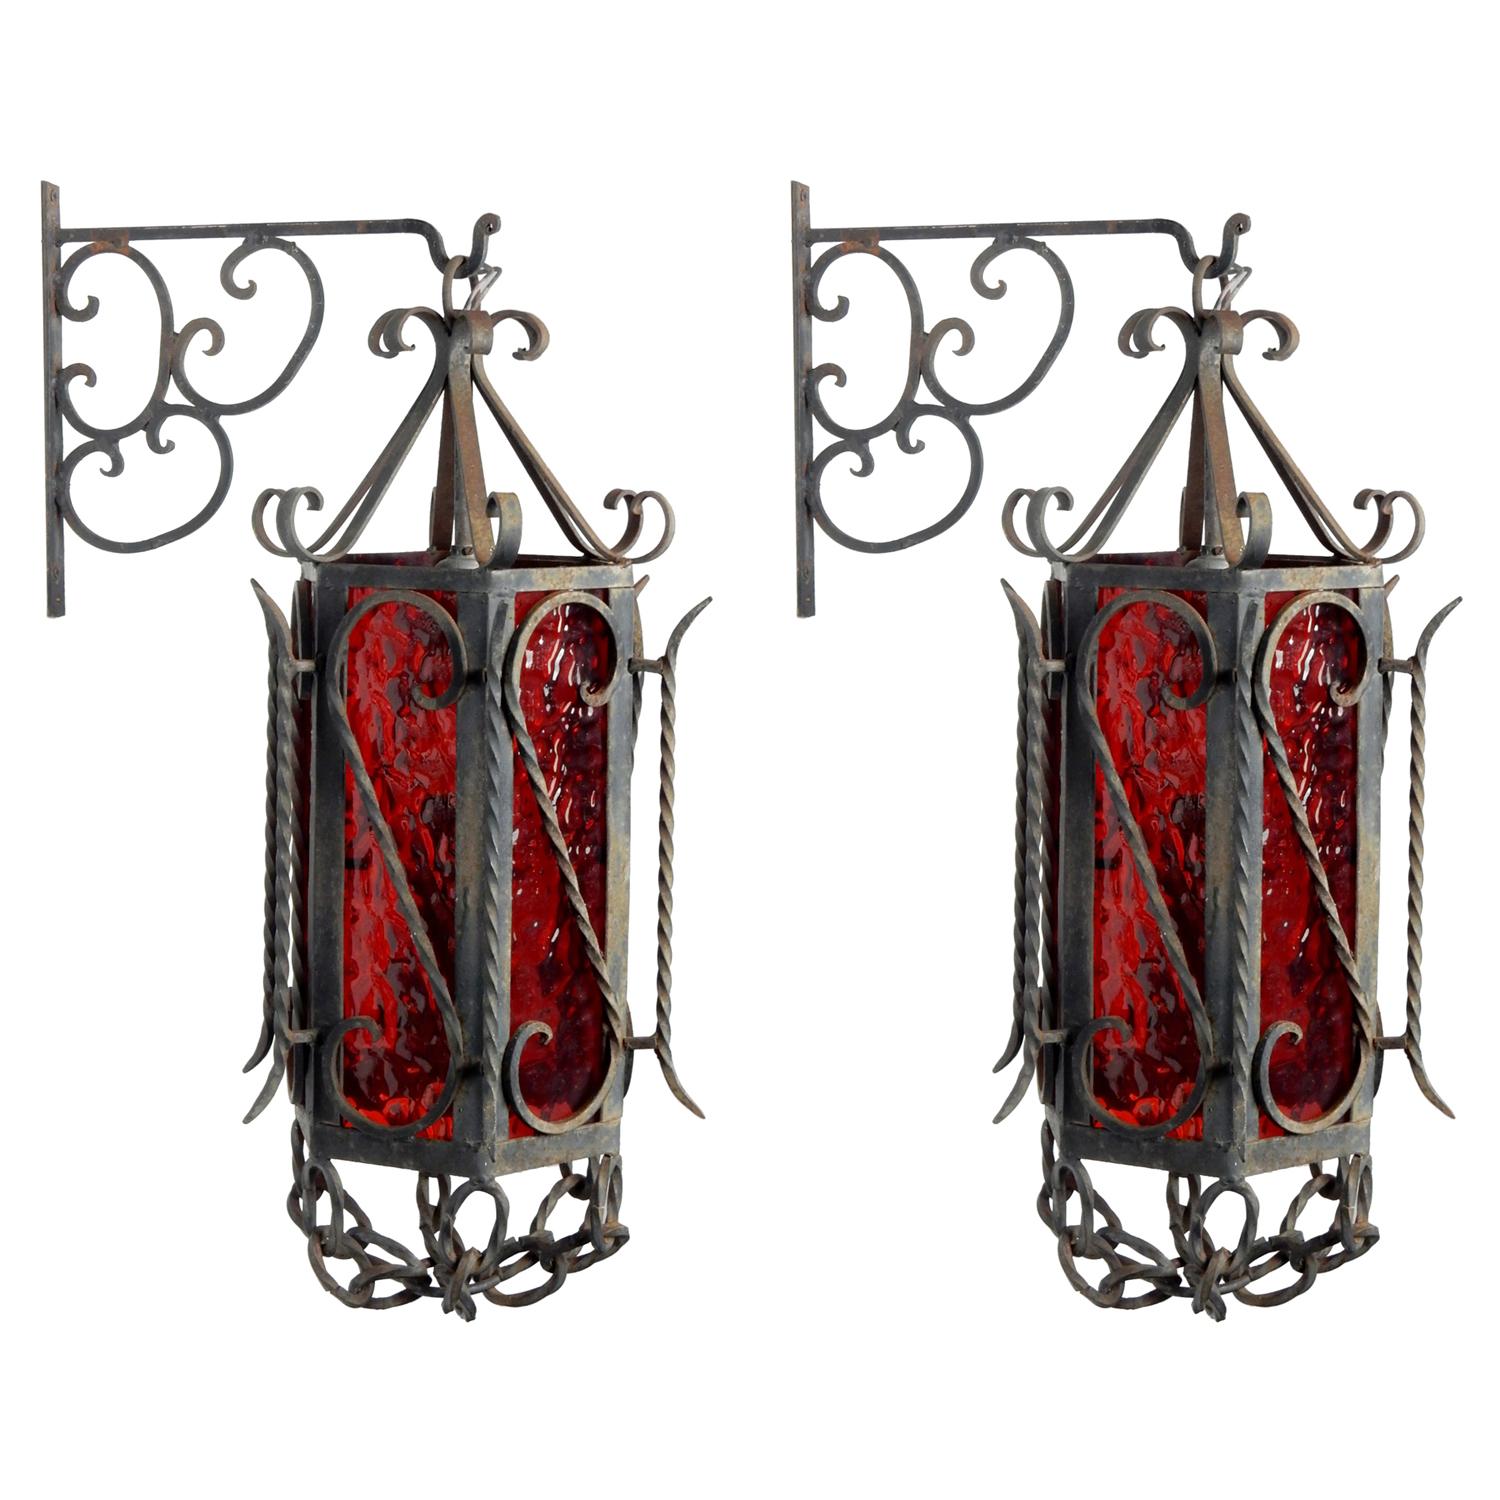 California Craftsman Iron Ornate Sconces Pendant Lamps with Ruby Red Glass, Pair For Sale